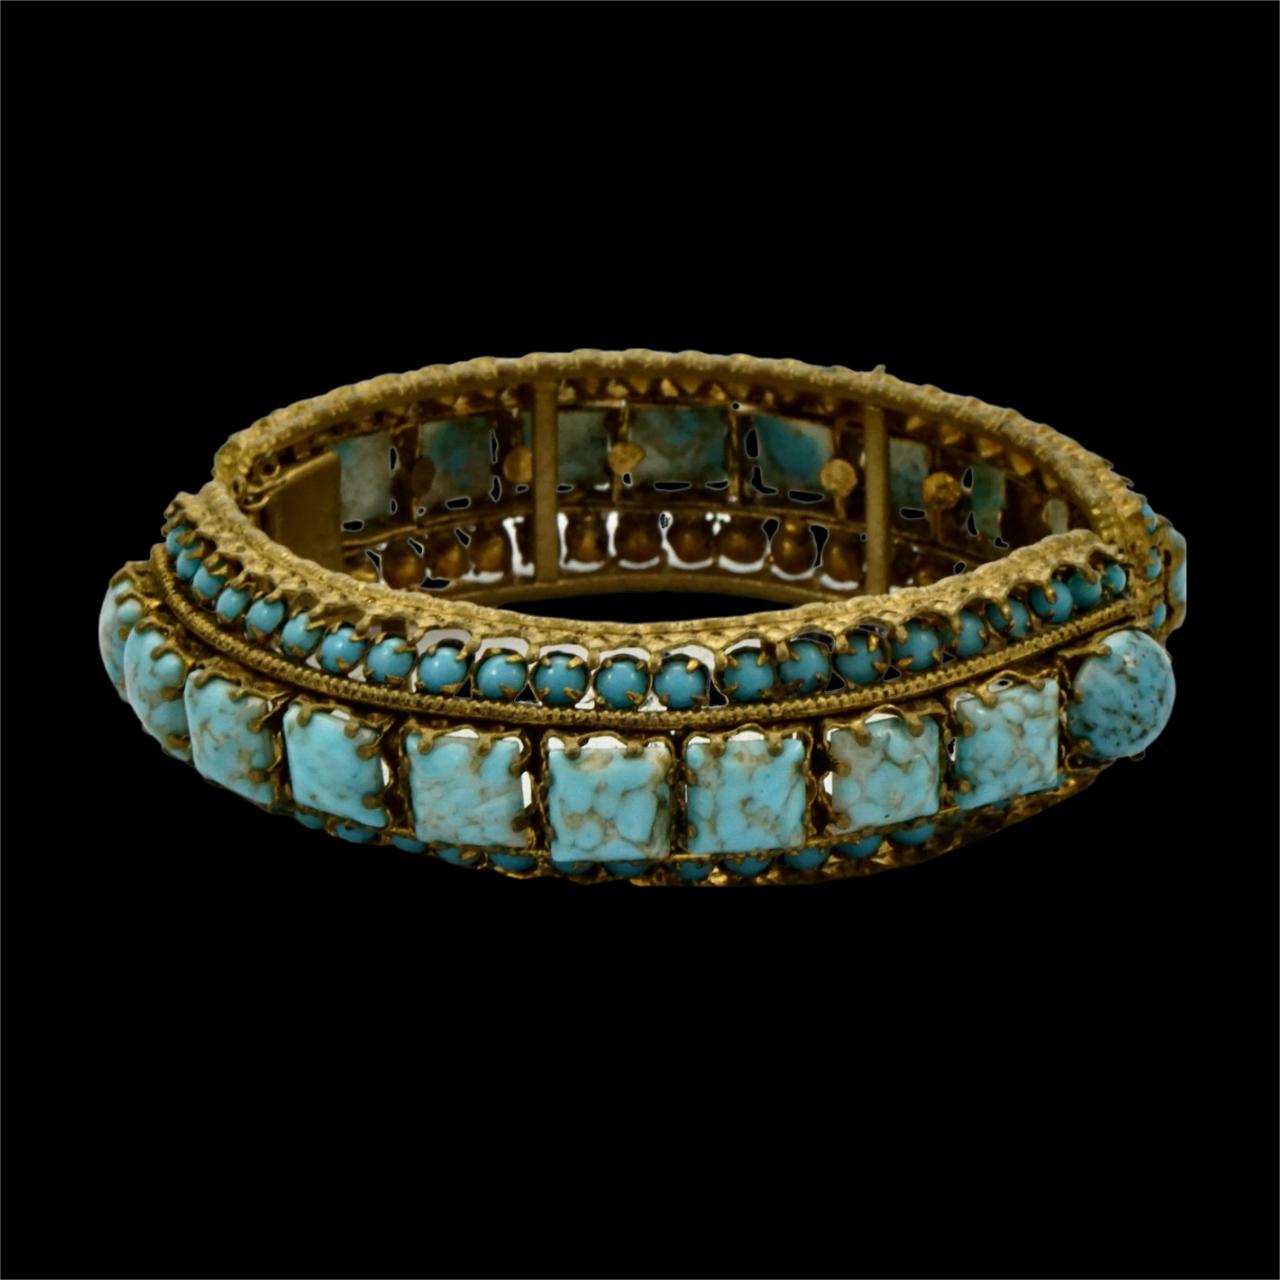 Gold Plated and Black Enamel Bangle Bracelet with Faux Turquoise Stones For Sale 4